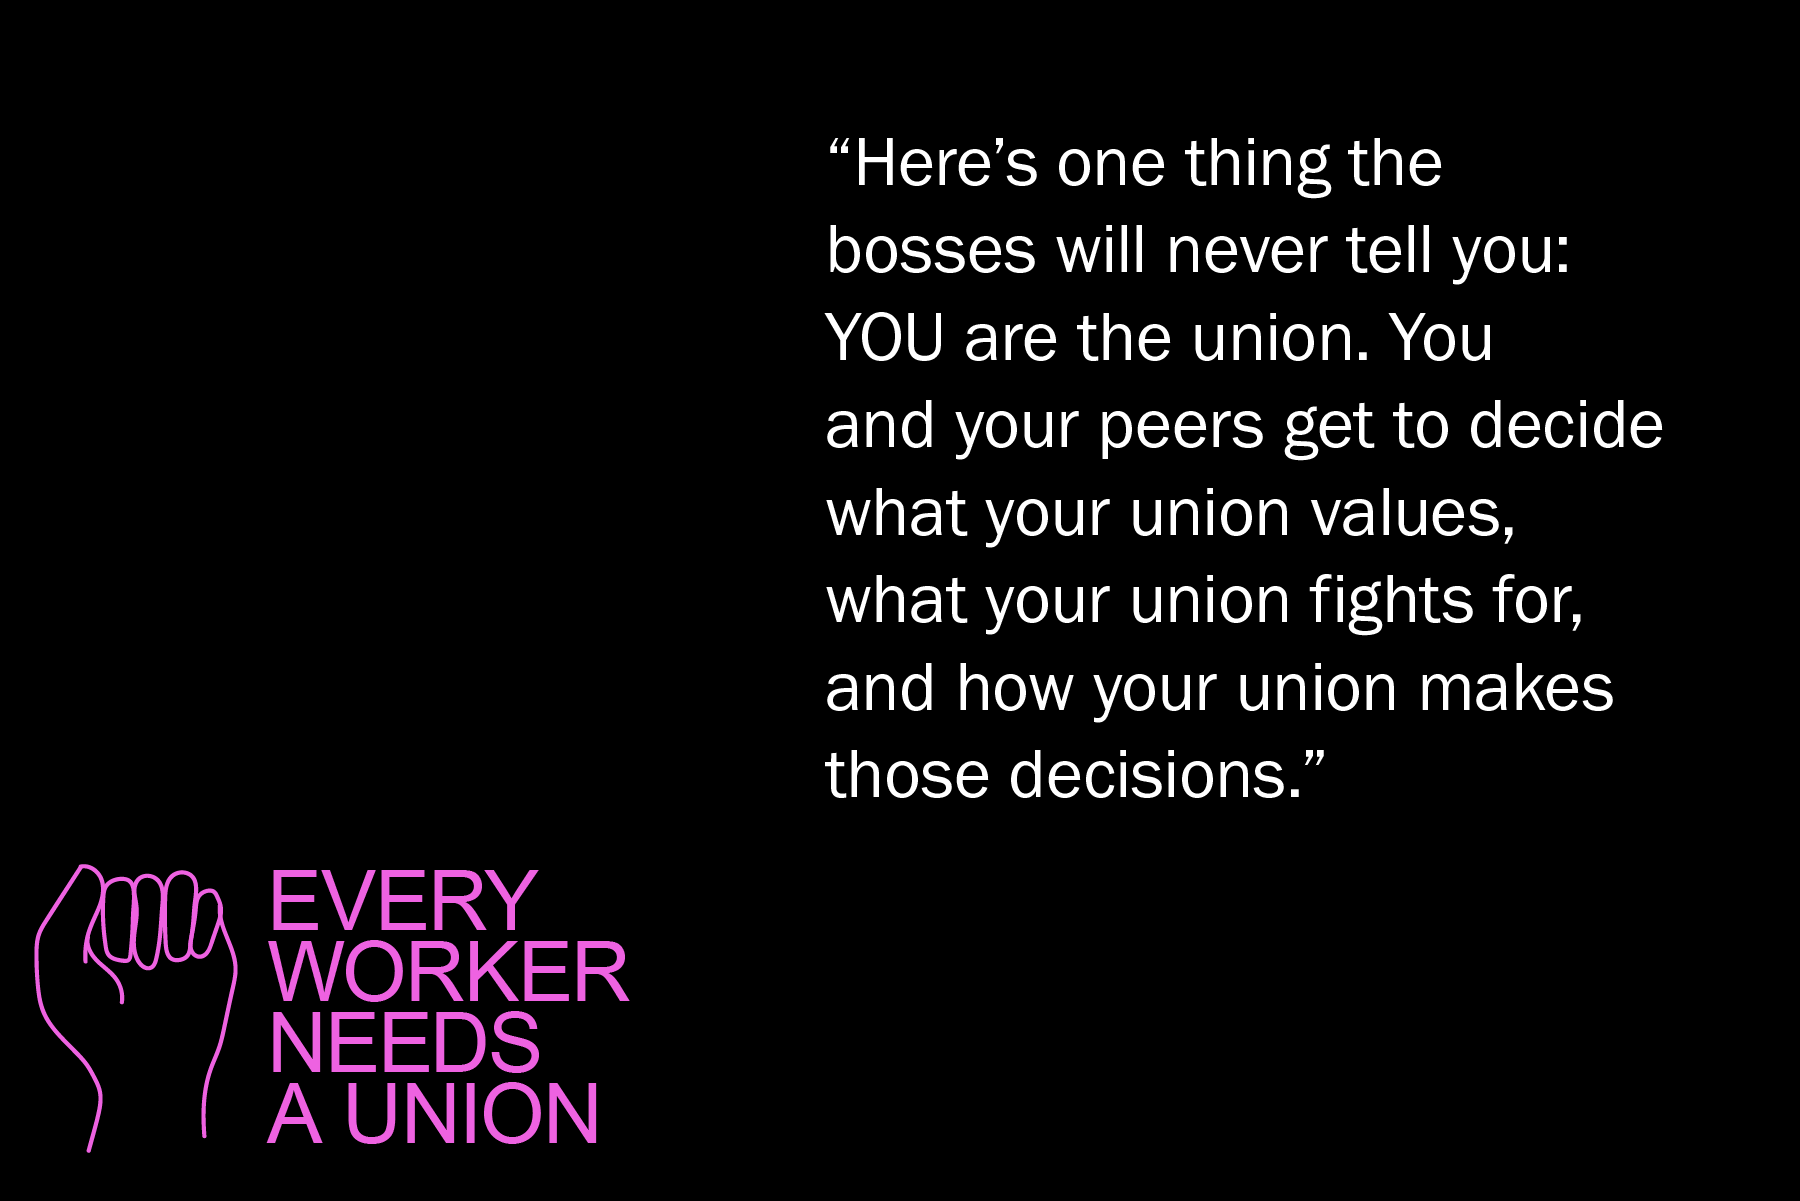 Here’s one thing the bosses will never tell you: YOU are the union. You and your peers get to decide what your union values, what your union fights for, and how your union makes those decisions.